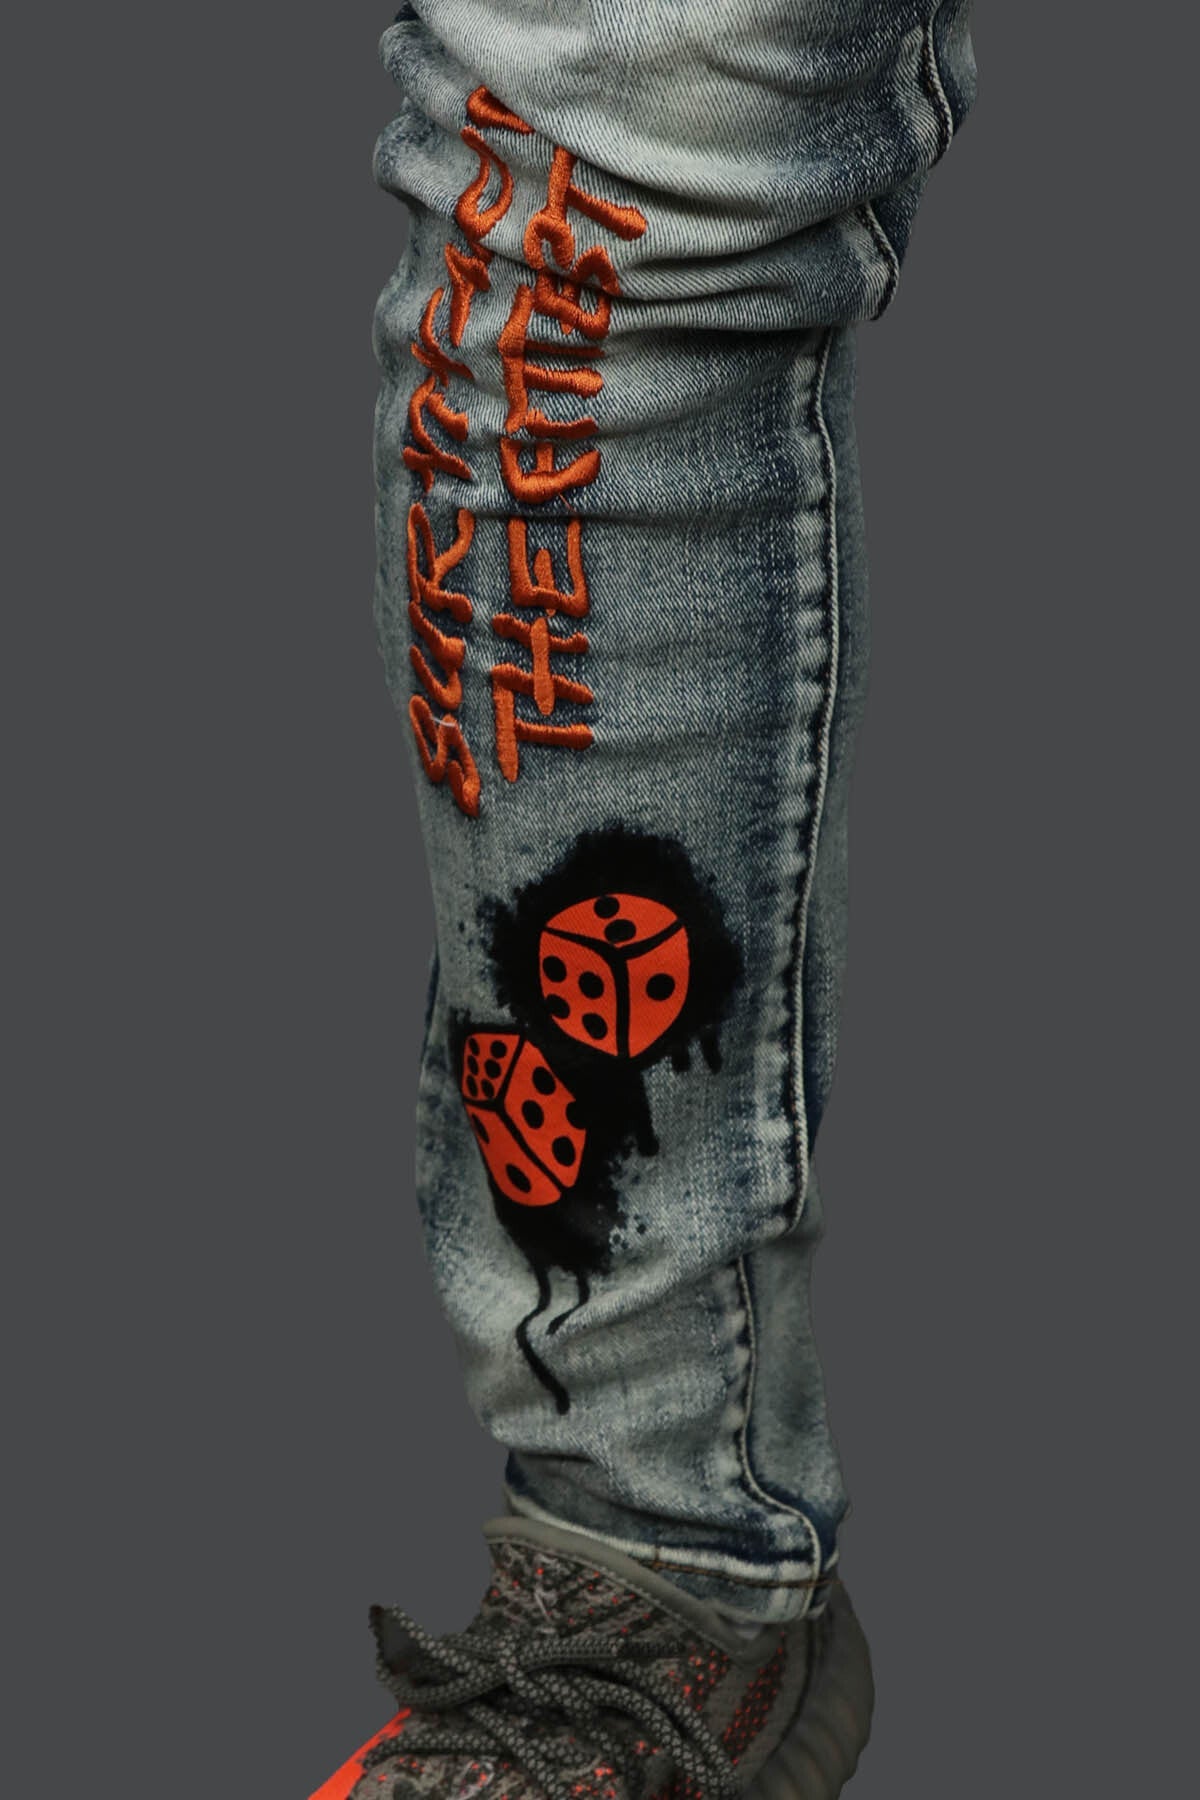 A close up of the custom graphic and words embroidered in ornage on the Only The Strong Custom Spray Painted Distressed Denim Pants Motive Denim | Vintage |  